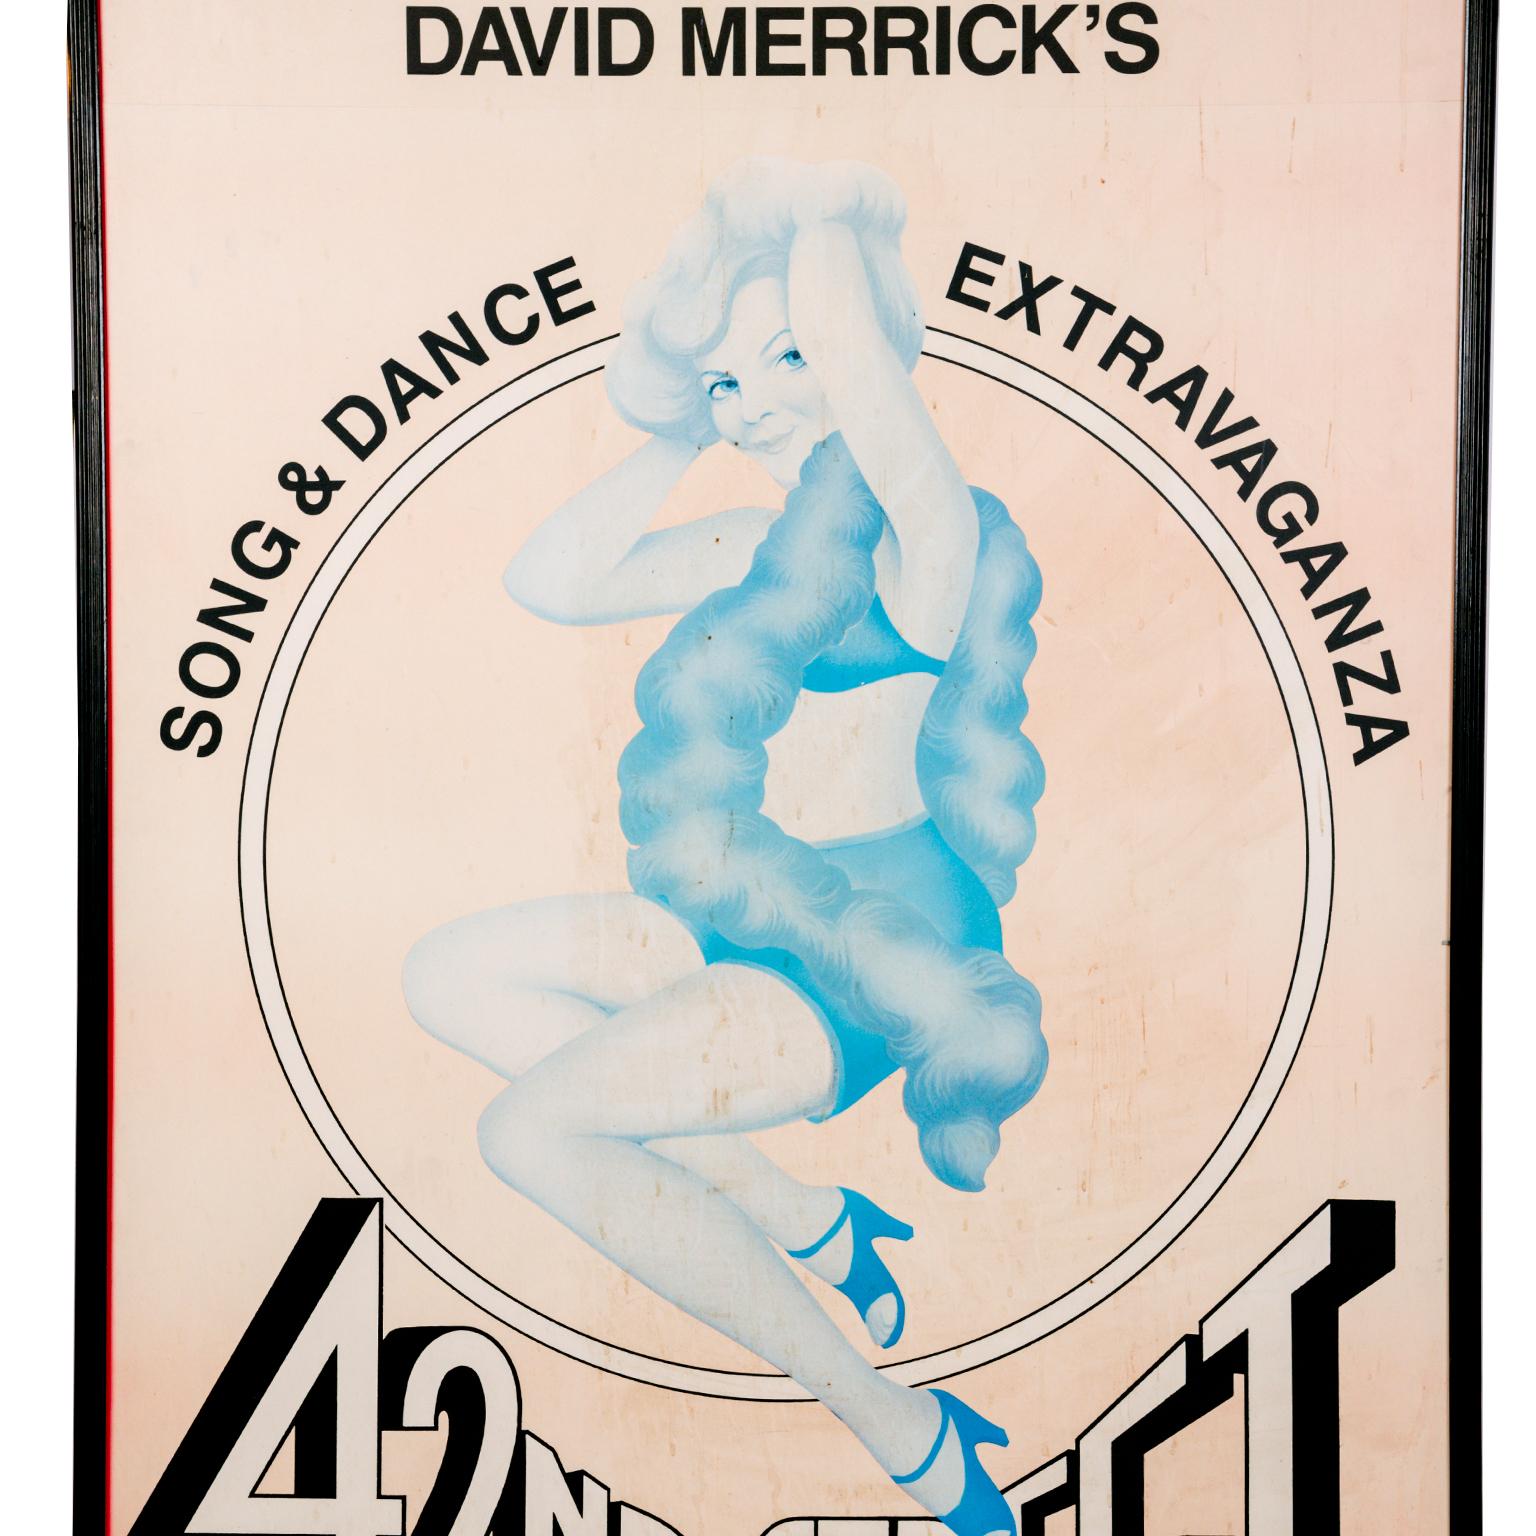 An impressive and large original advertising poster from producer David Merrick’s 1980 production of the award winning Broadway musical 42 Street. It is framed on board and in an dark wood frame.
“The 1980 Broadway production won the Tony Awards